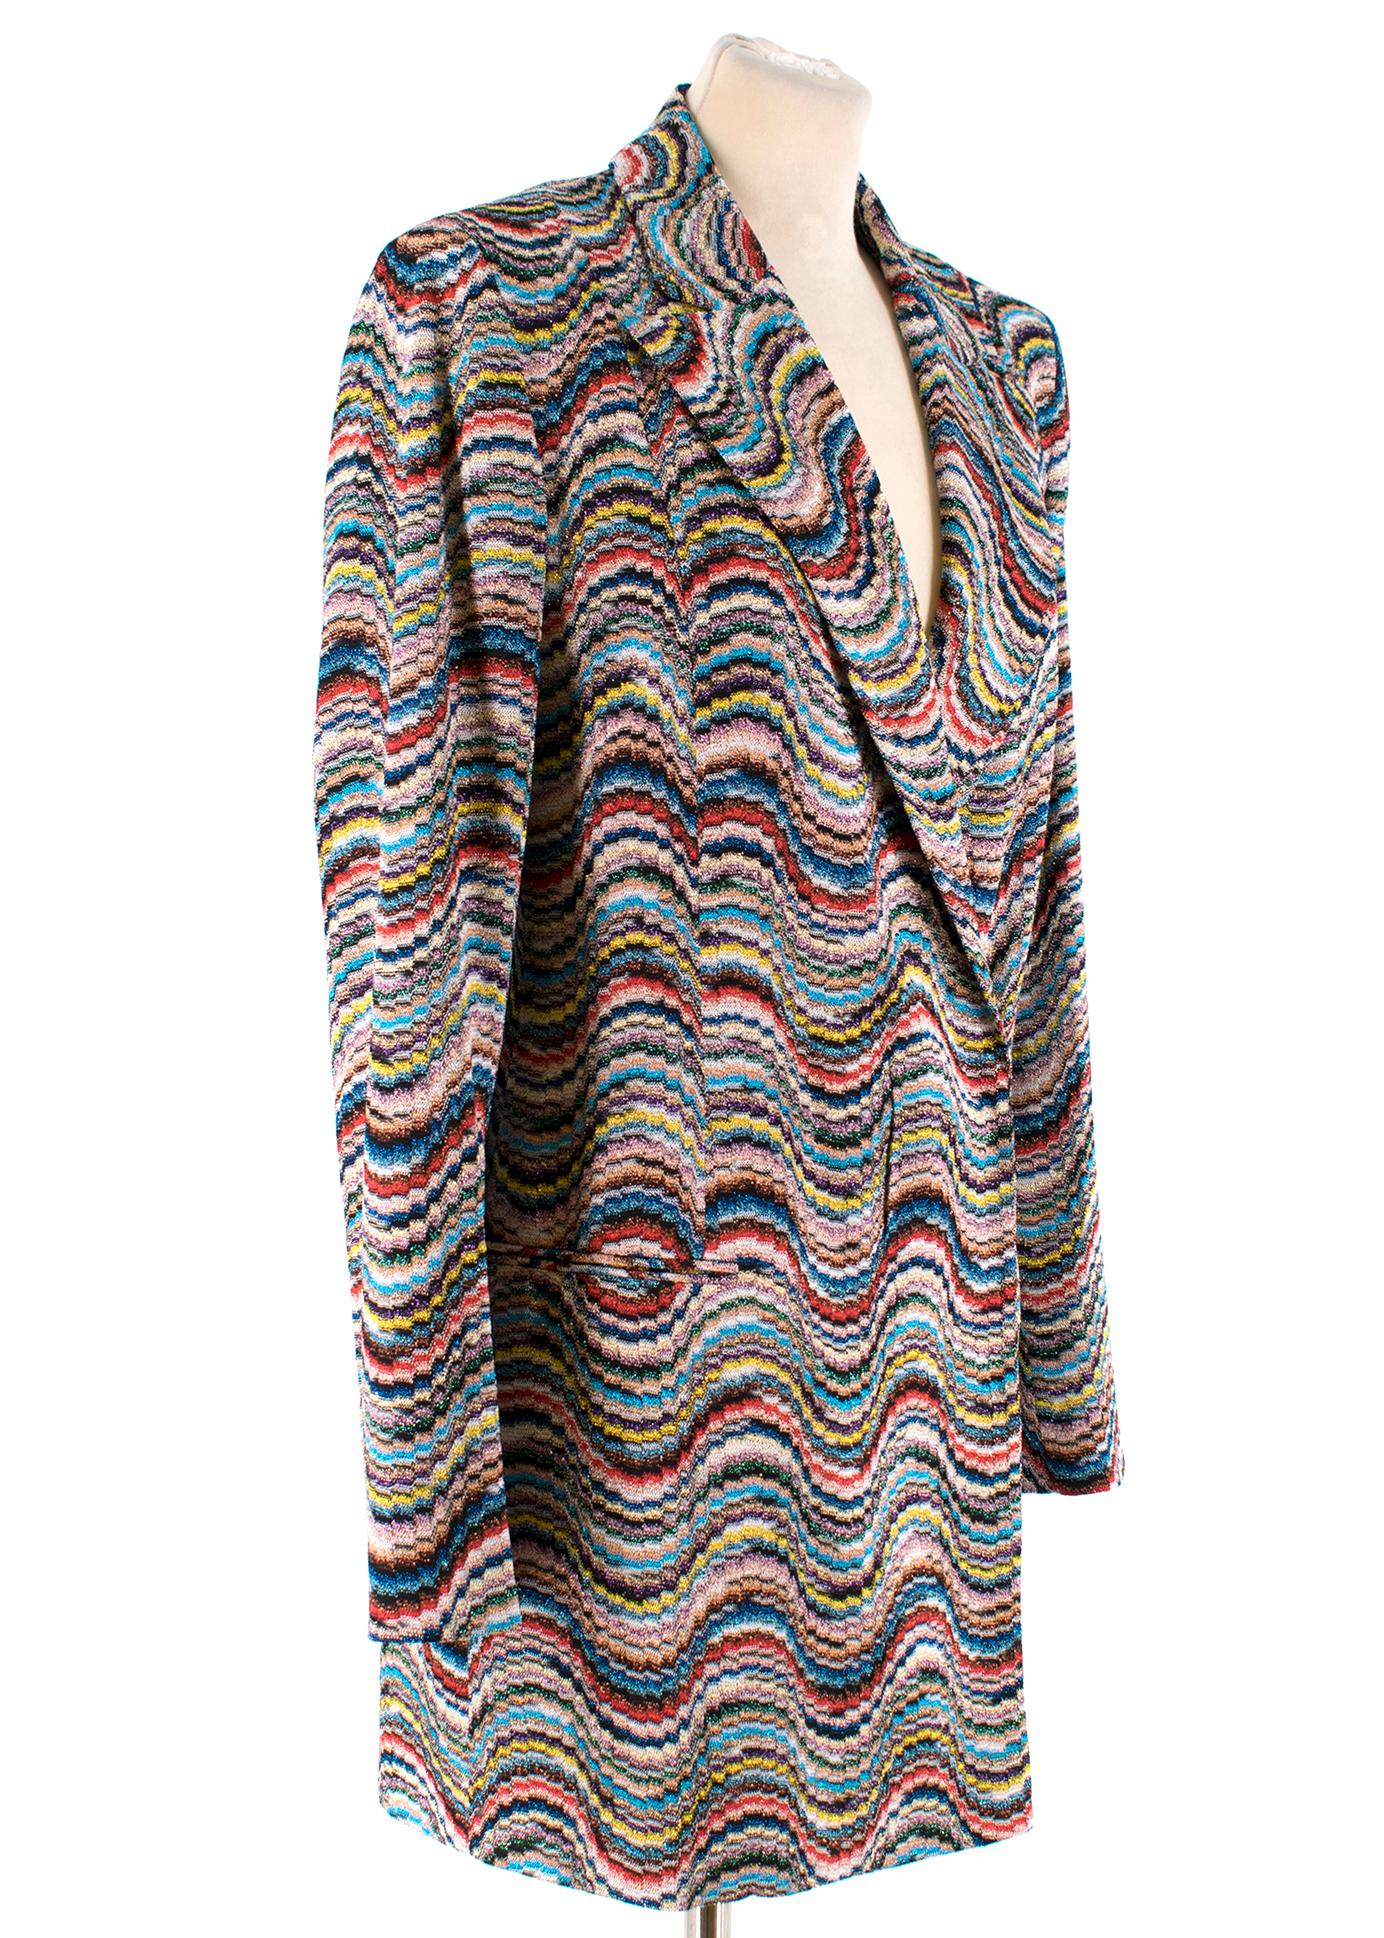  Missoni Multicoloured Jacket

-Multicoloured blazer
-Shoulder pads
-Popper and button closure
-Two front pockets
-Blazer can be worn as a tuxedo dress

Please note, these items are pre-owned and may show signs of being stored even when unworn and